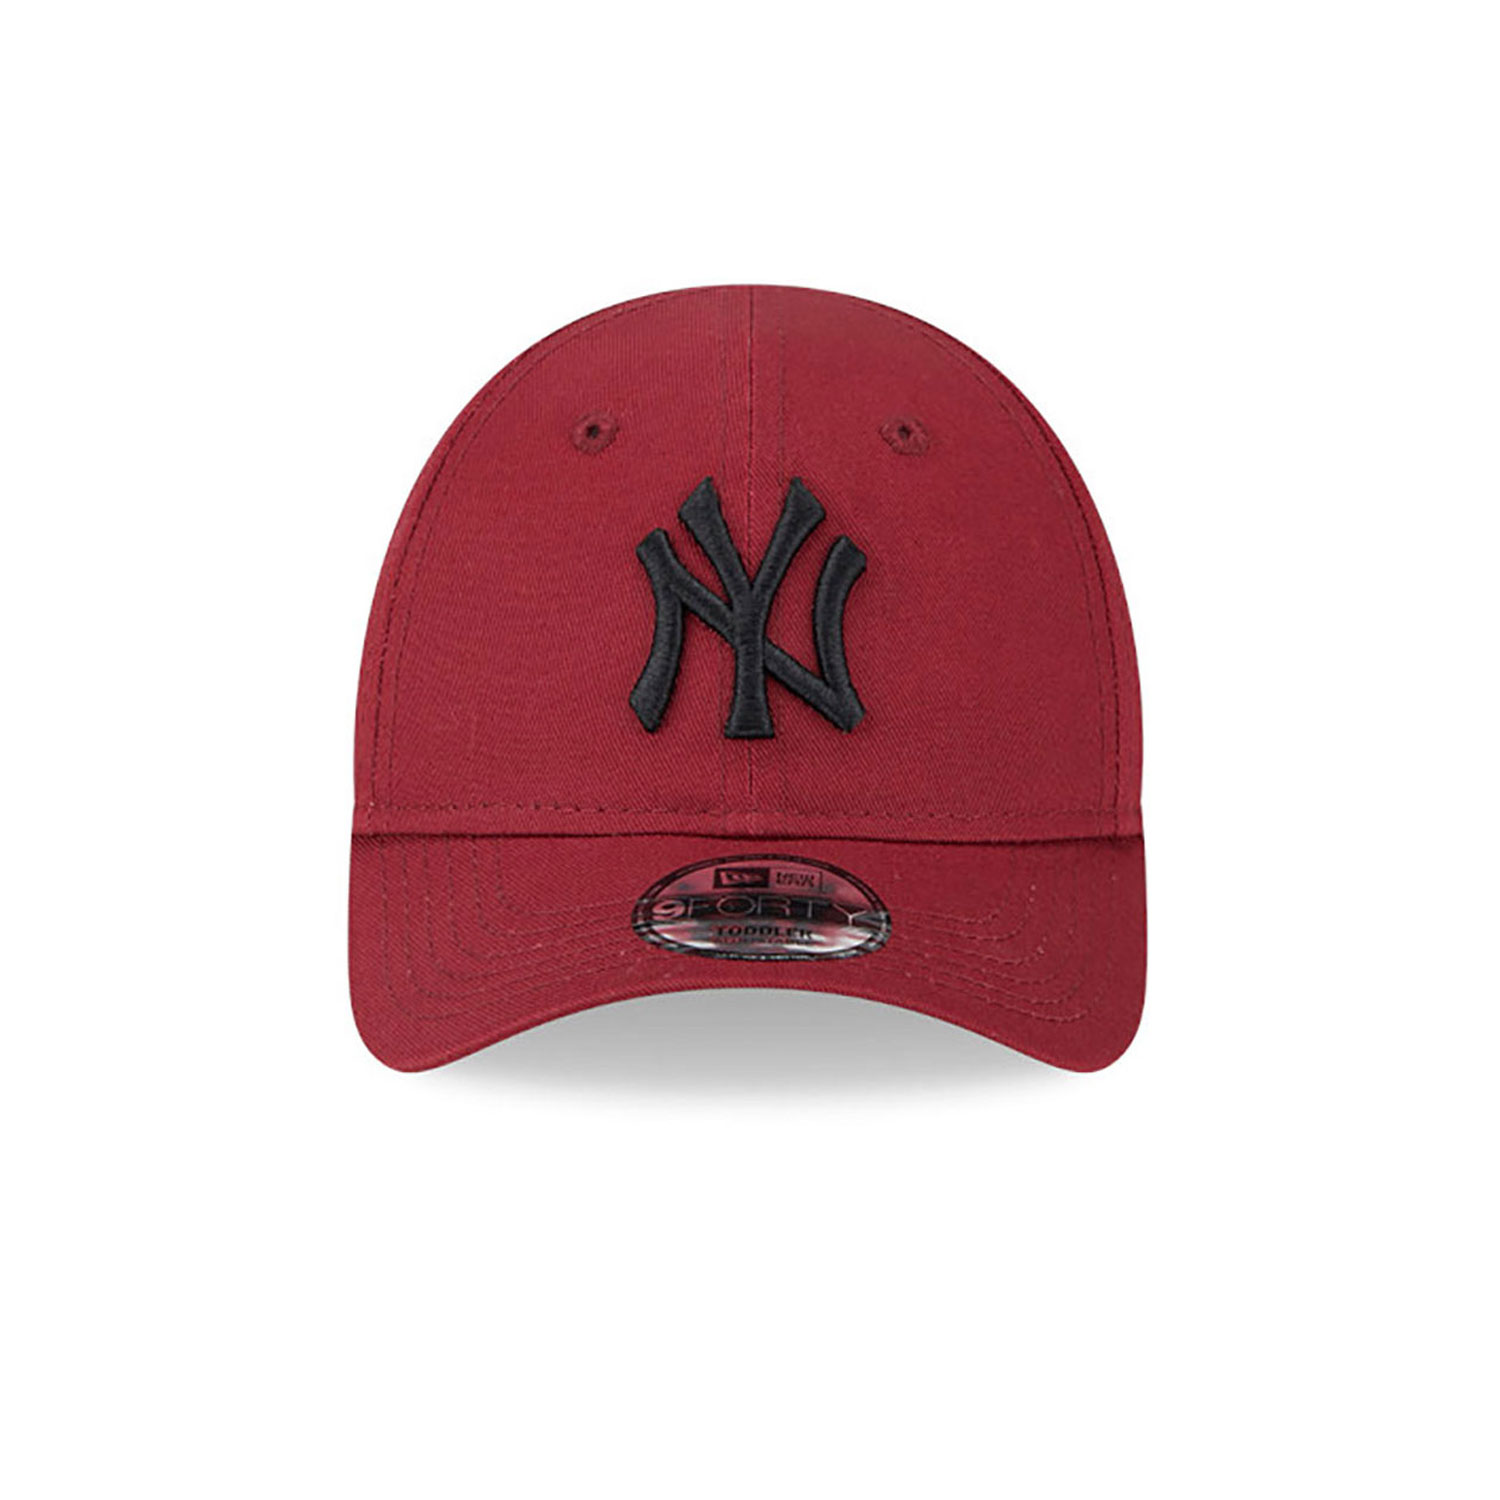 New York Yankees Toddler League Essential Red 9FORTY Adjustable Cap